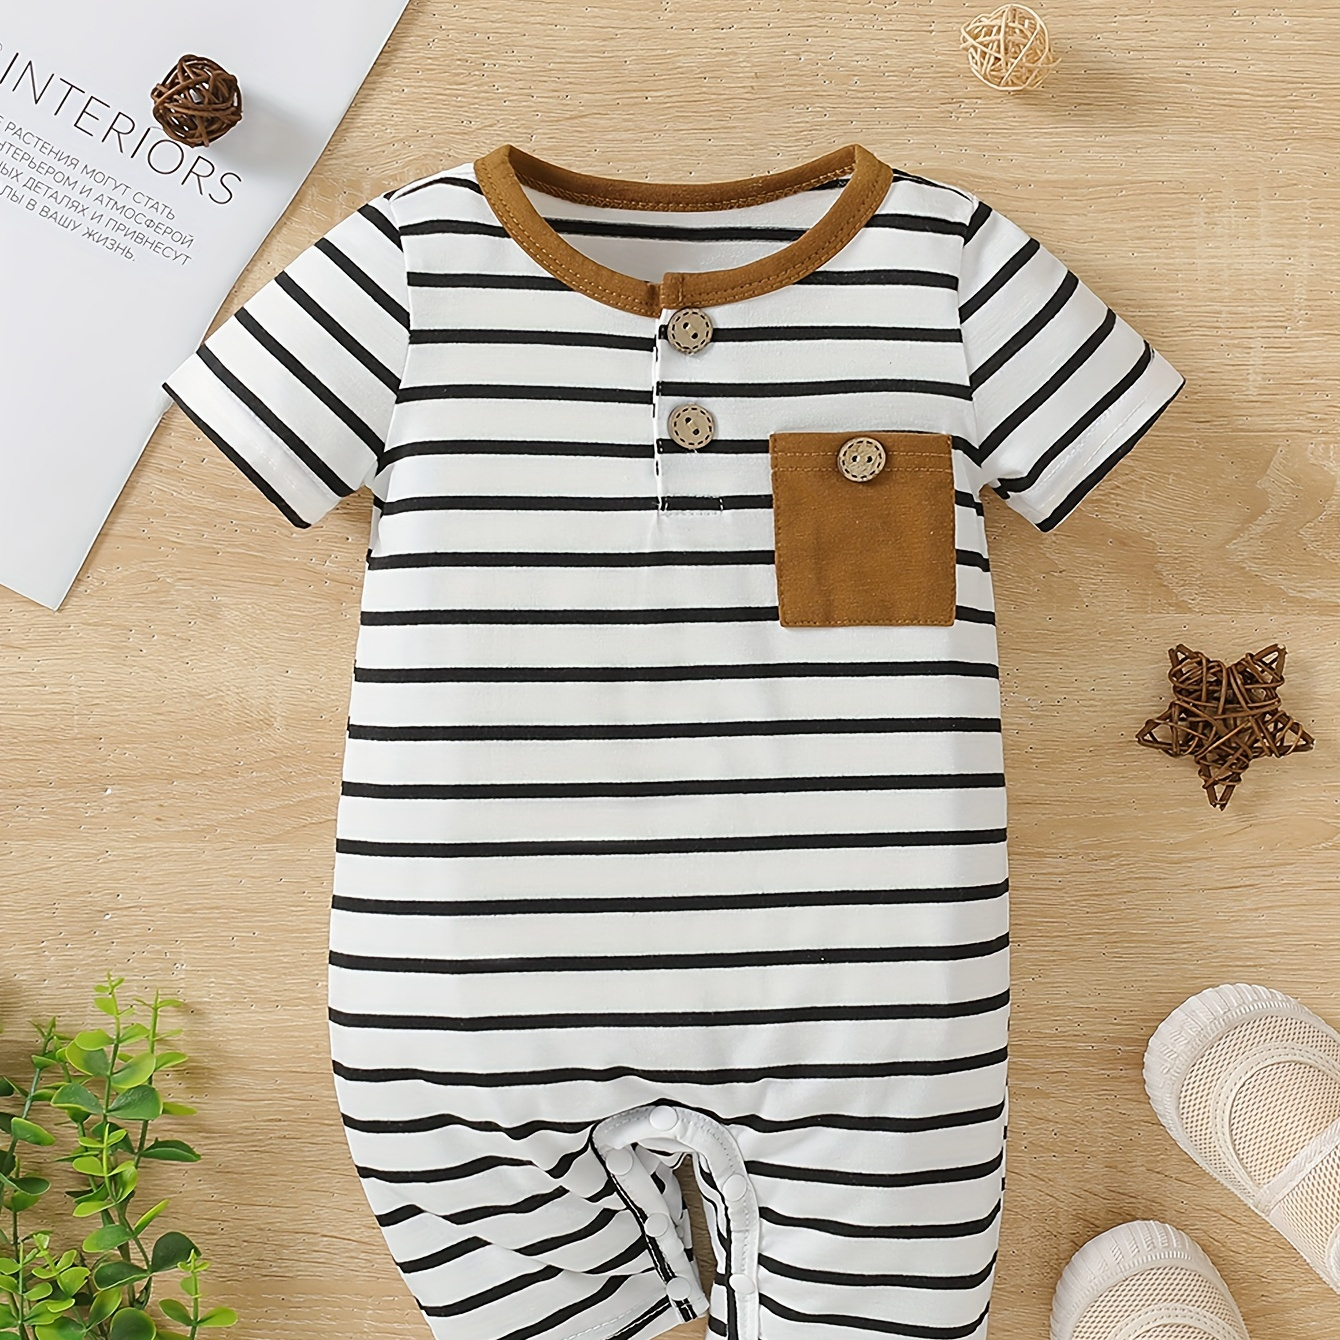 

Infant Unisex Summer Short-sleeve Striped Romper With Button Detail, Casual Style Baby One-piece Outfit